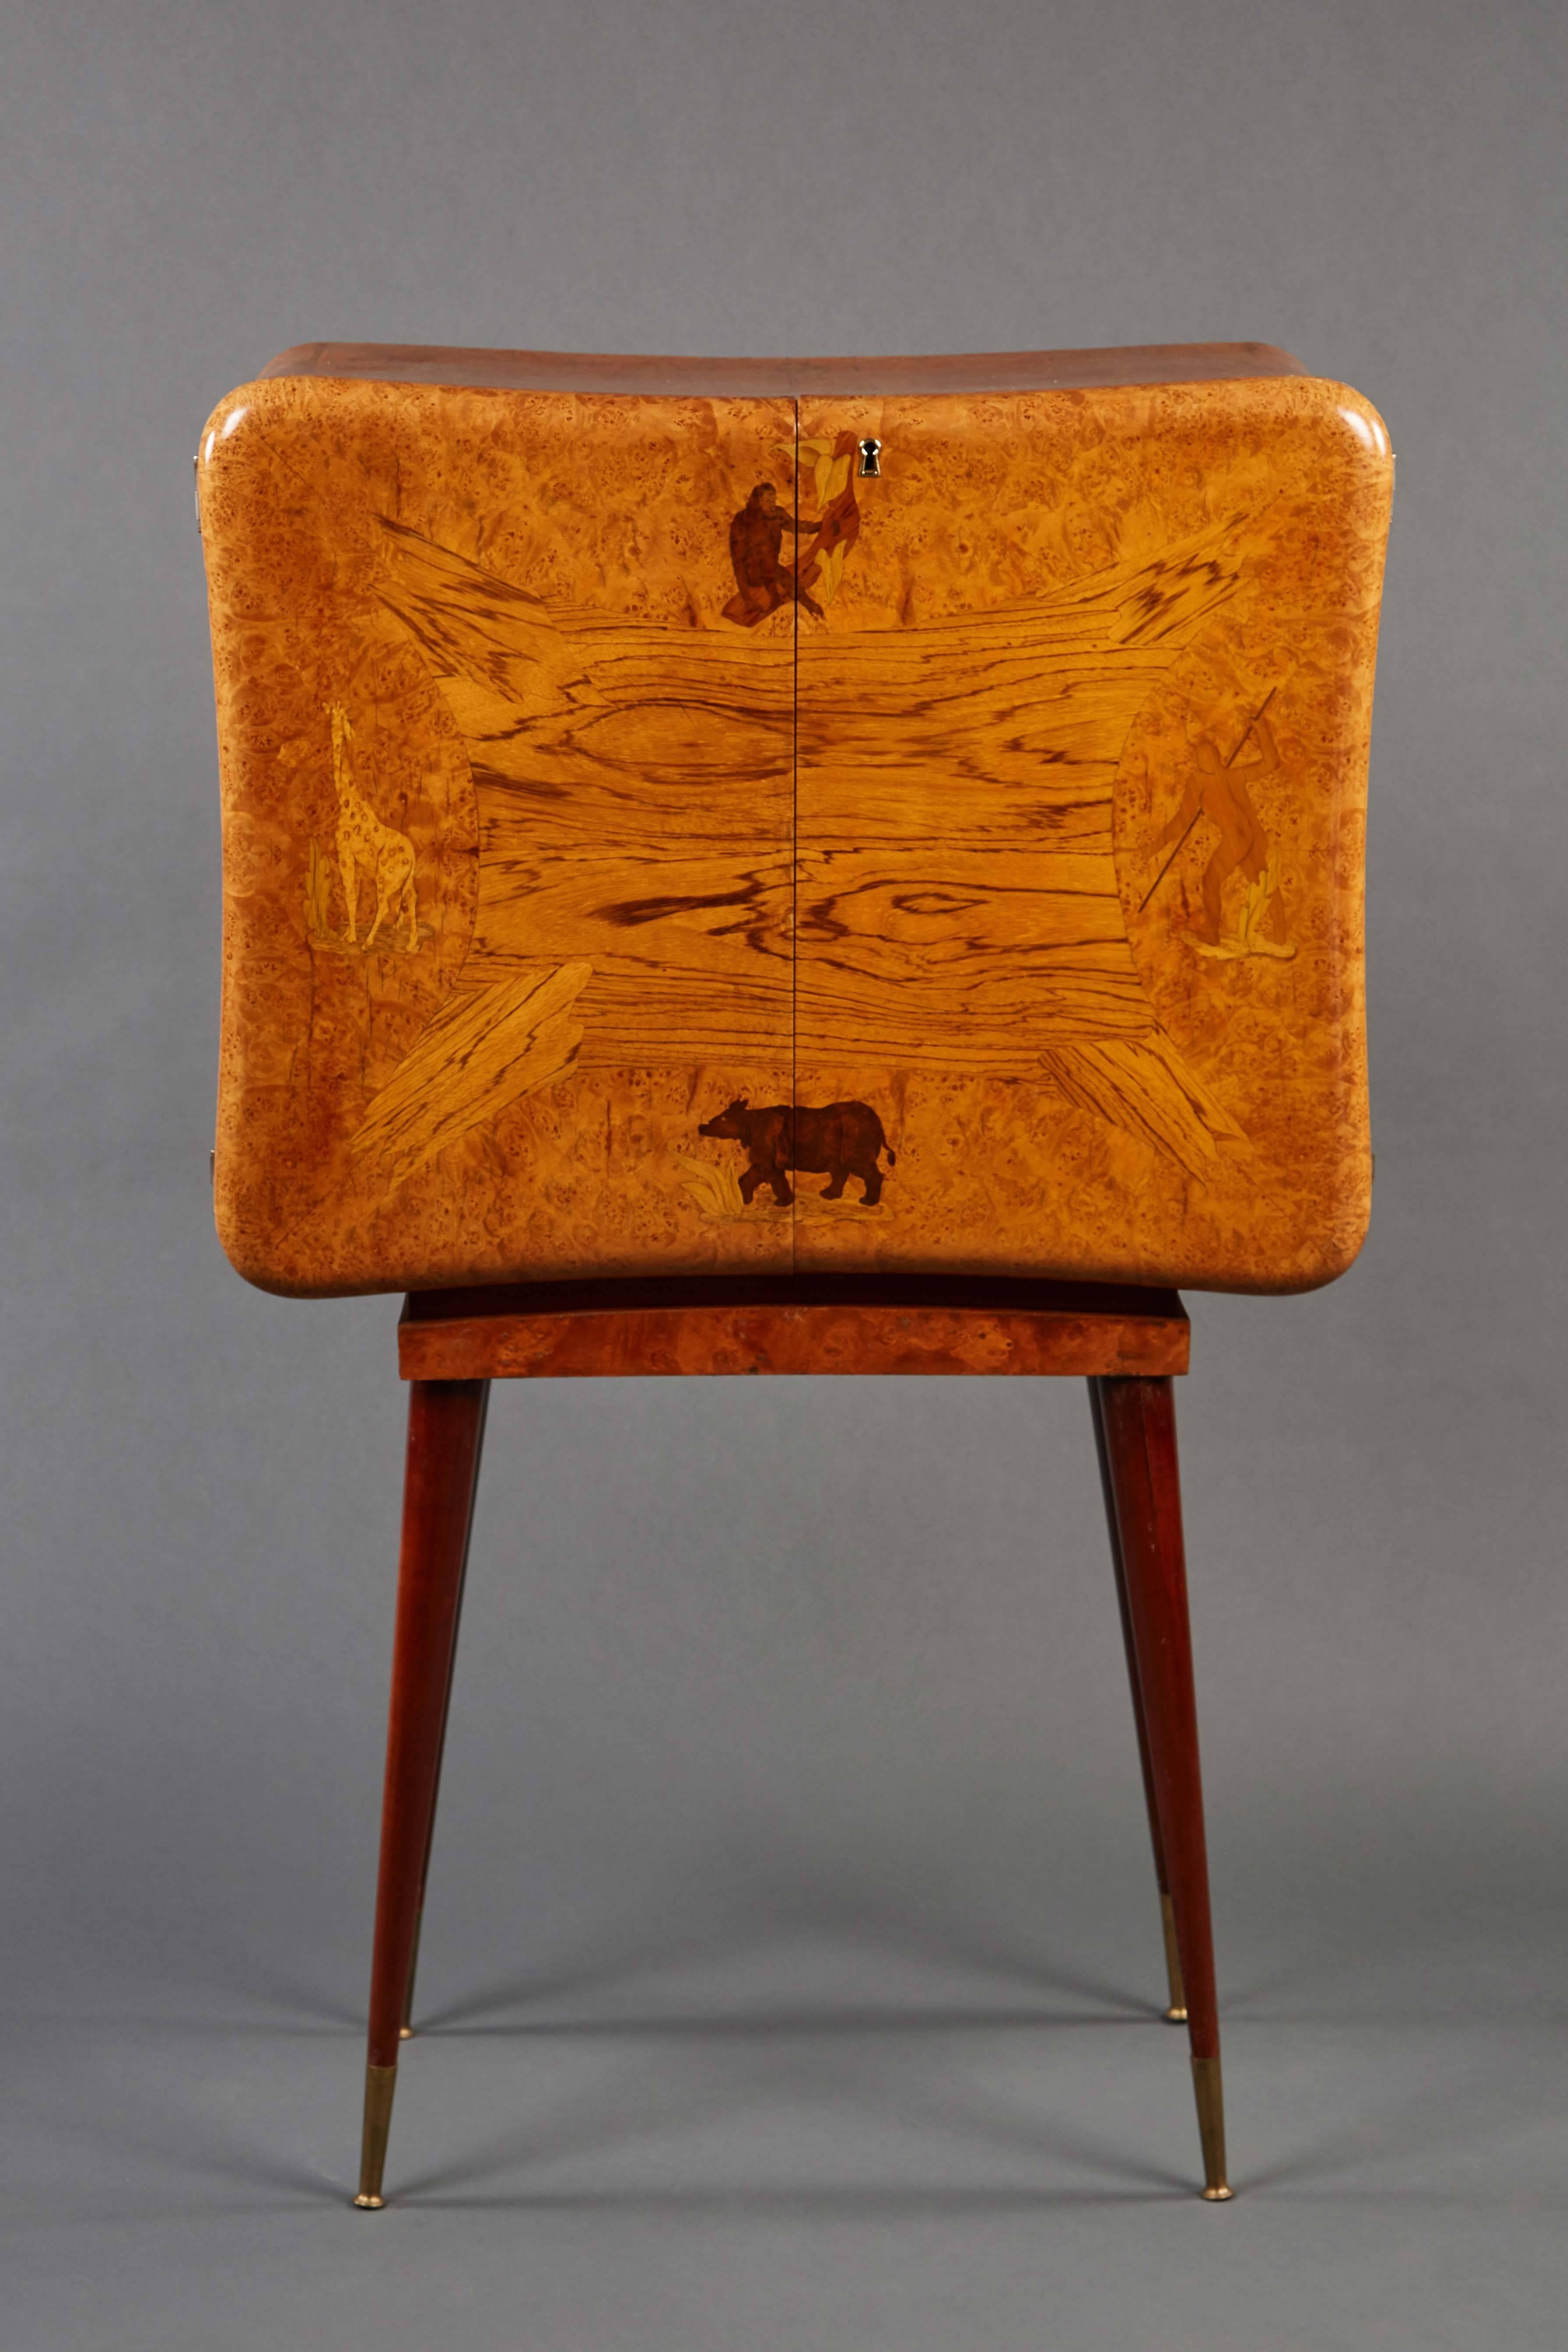 A bold and stunning high marquetry dry bar depicting animals and hunter, with its body resting on four tapered legs terminating in brass sabots.